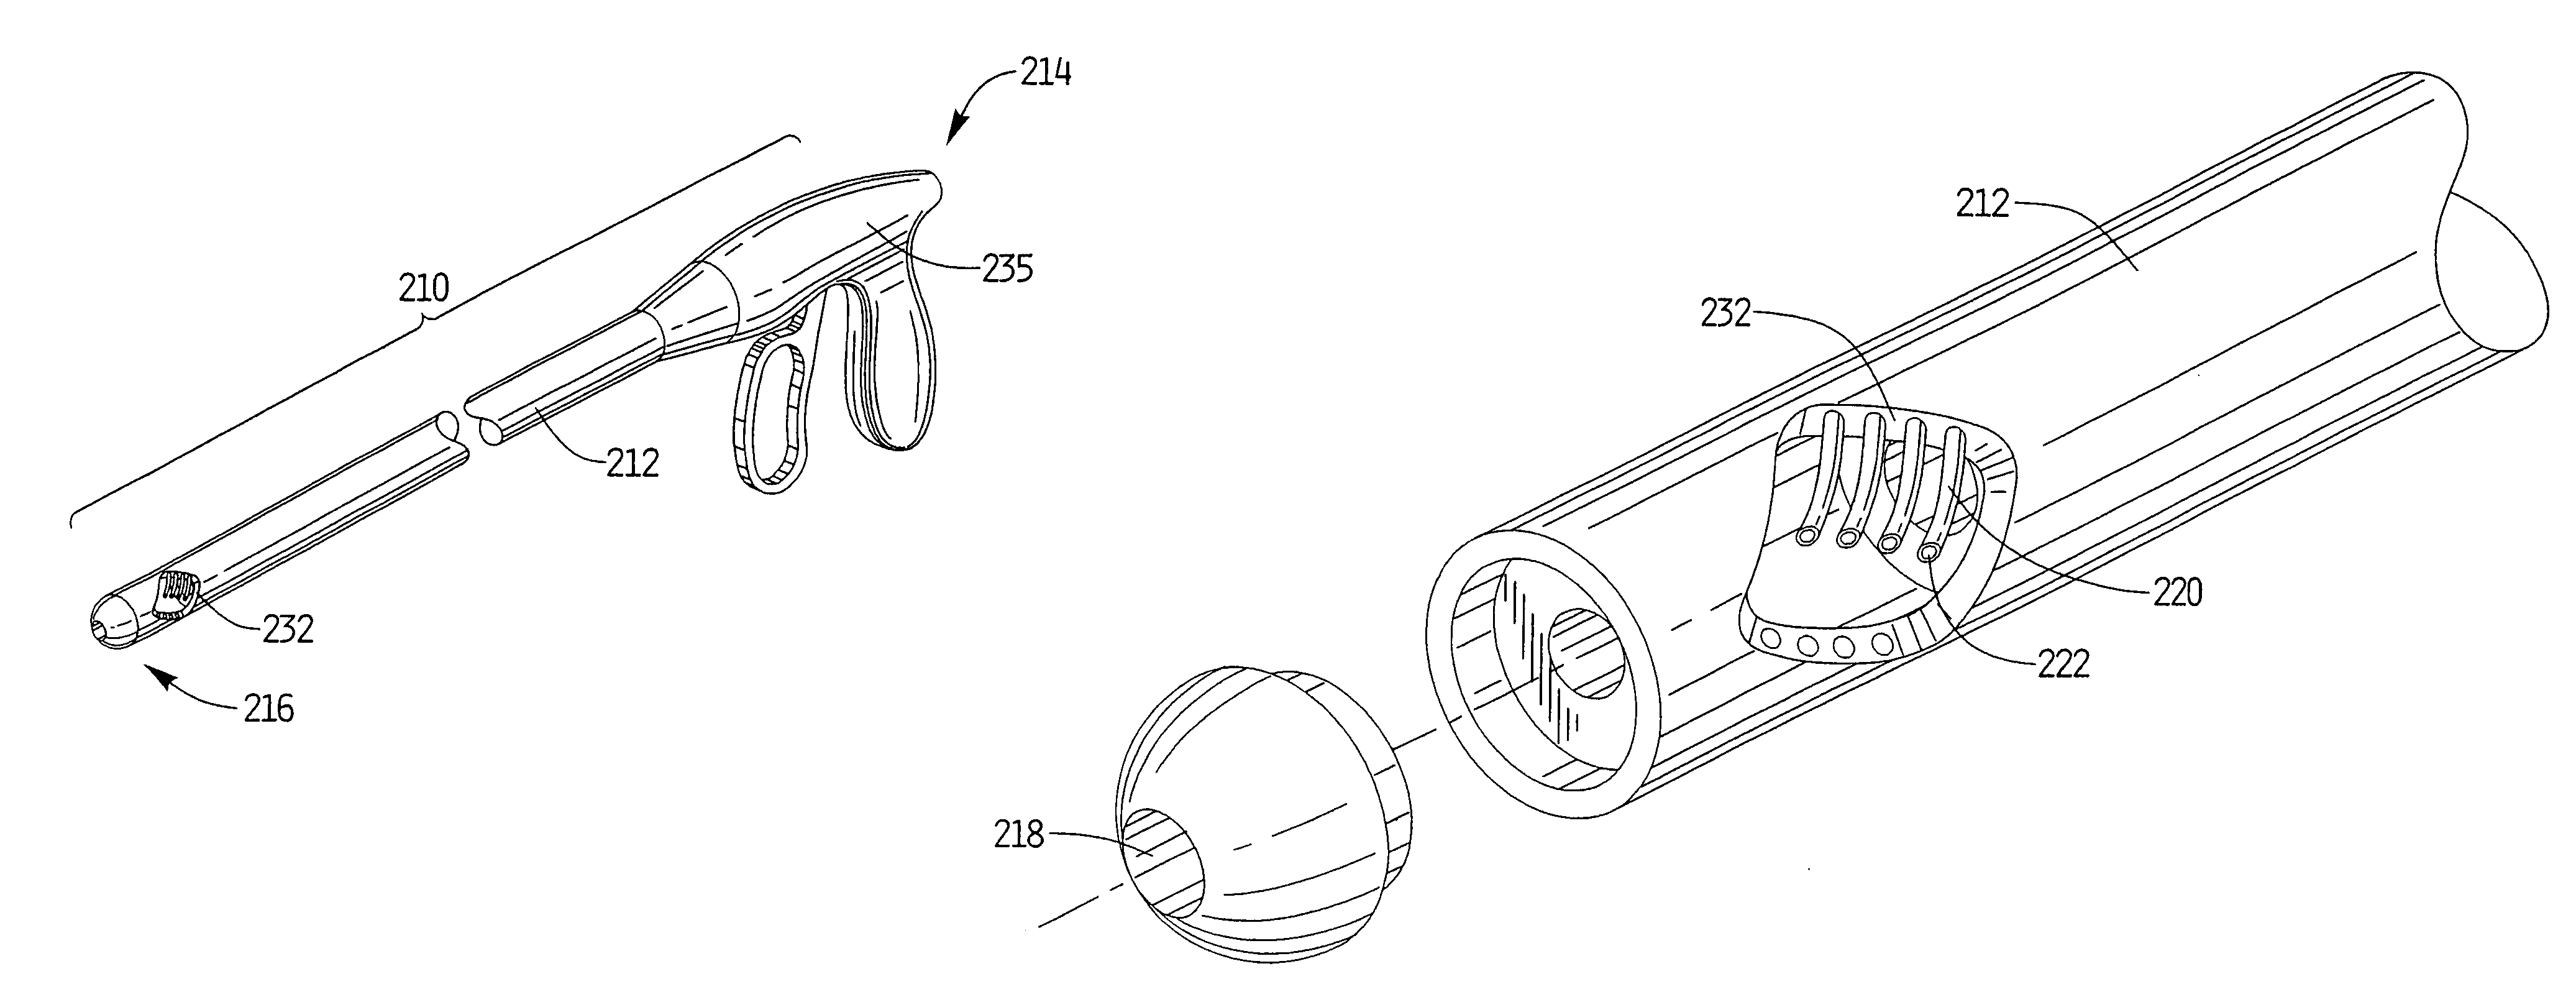 Apparatus and method for treating gastroesophageal reflux disease